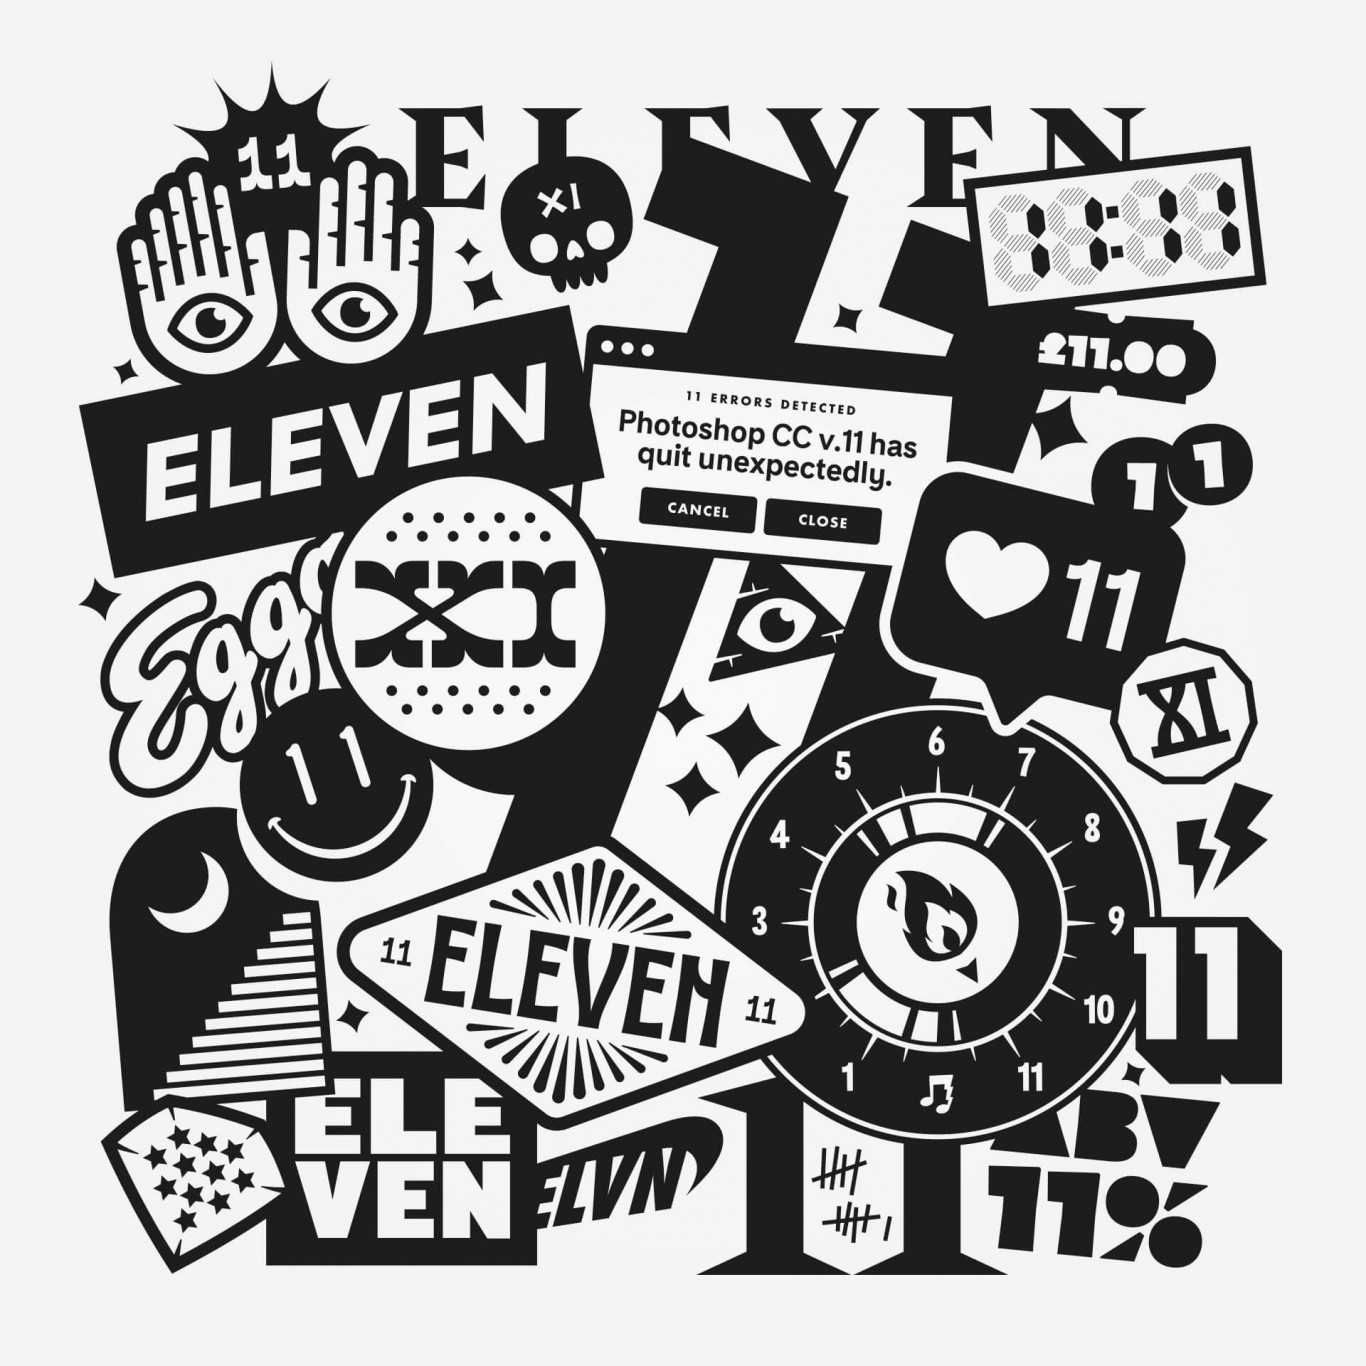 Artwork contains a mess of illustrated instances of the number eleven, and other eleven based visuals and graphics. Artwork is set in black on a white background